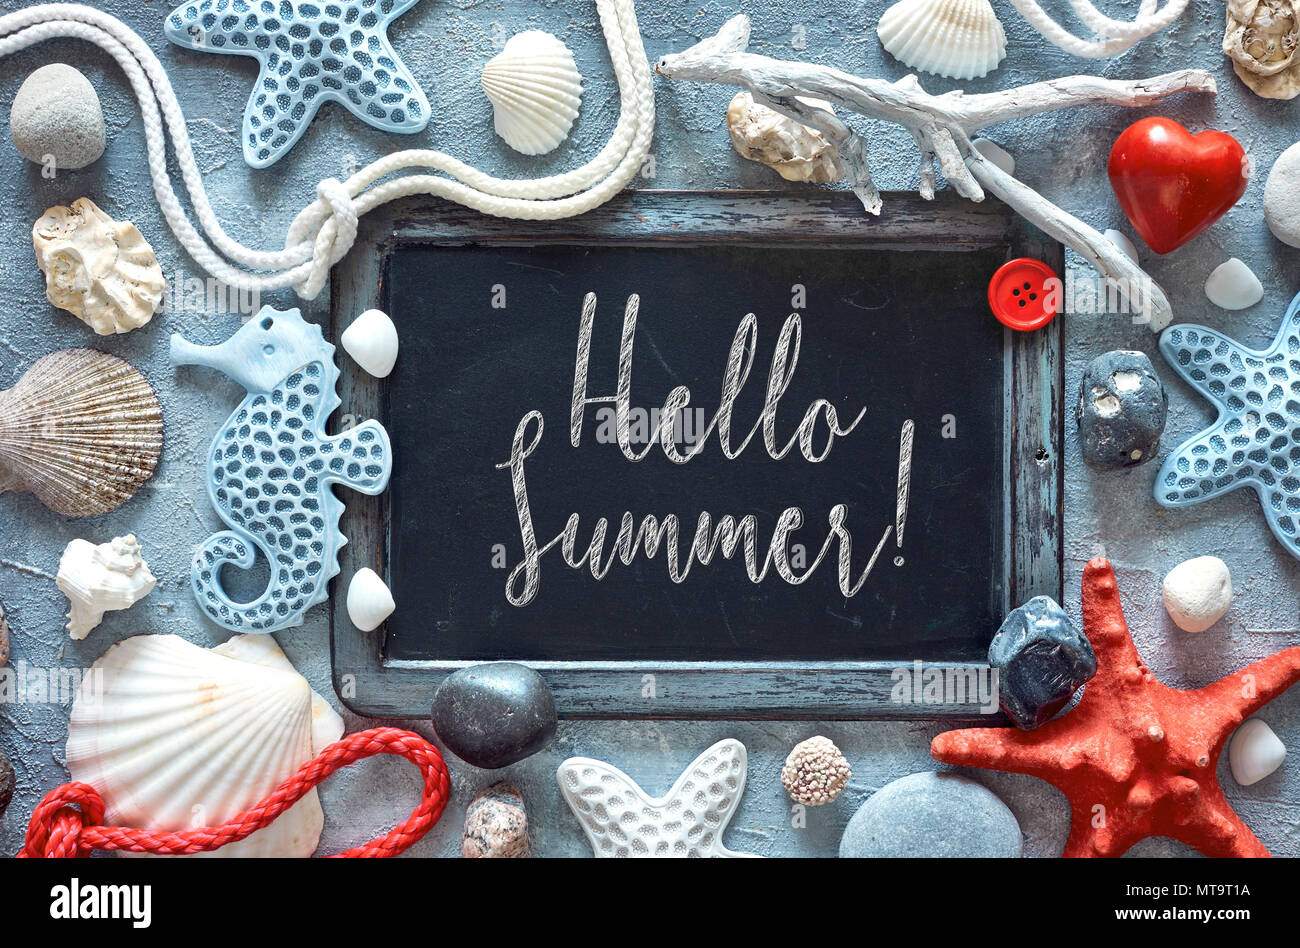 Blackboard with sea shells, stones, rope and star fish on textured light blue background, text 'Hello Summer' in chalk Stock Photo